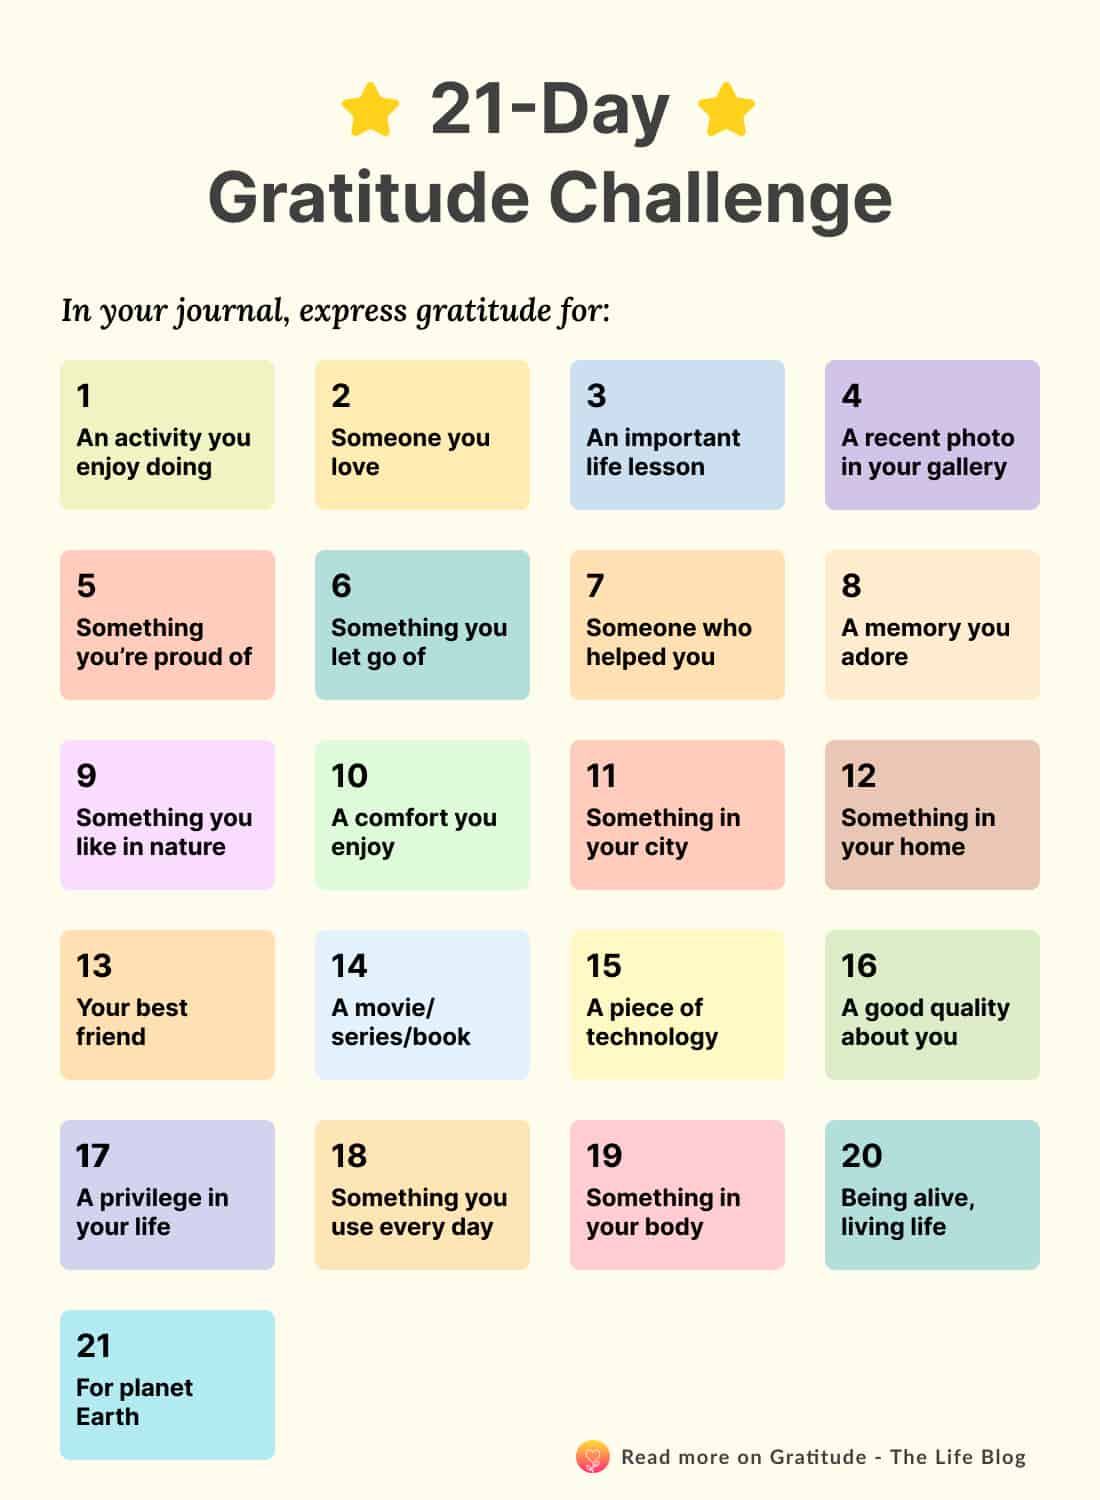 21Day Gratitude Challenge to Build the Habit of Being Grateful